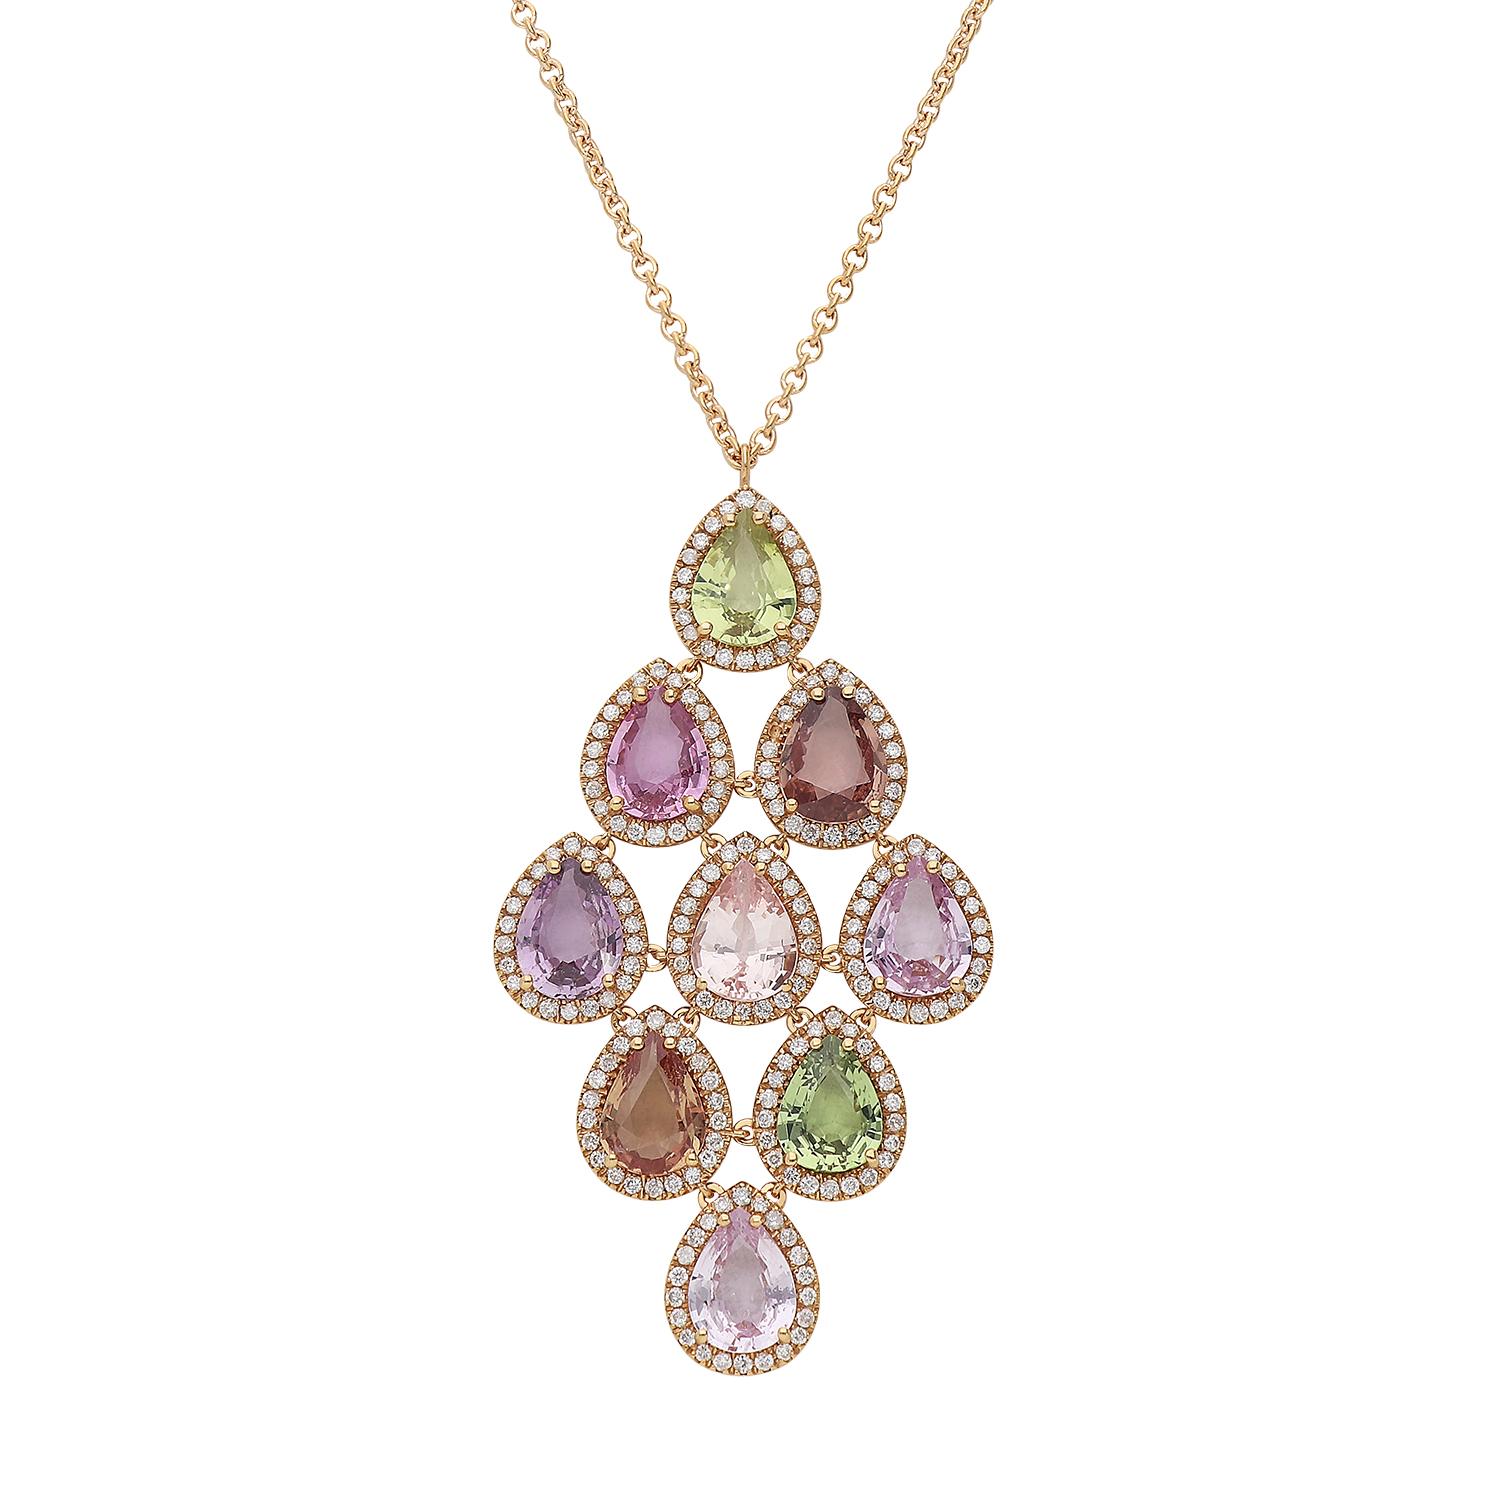 A stunning 18kt rose gold pendant choker weighing a total of 9.40 grams with pendant composed of multi-color drop-cut sapphires. Each sapphire is surrounded by brilliant-cut diamonds, color G SI clarity. The total weight of sapphires is 10.23 carats